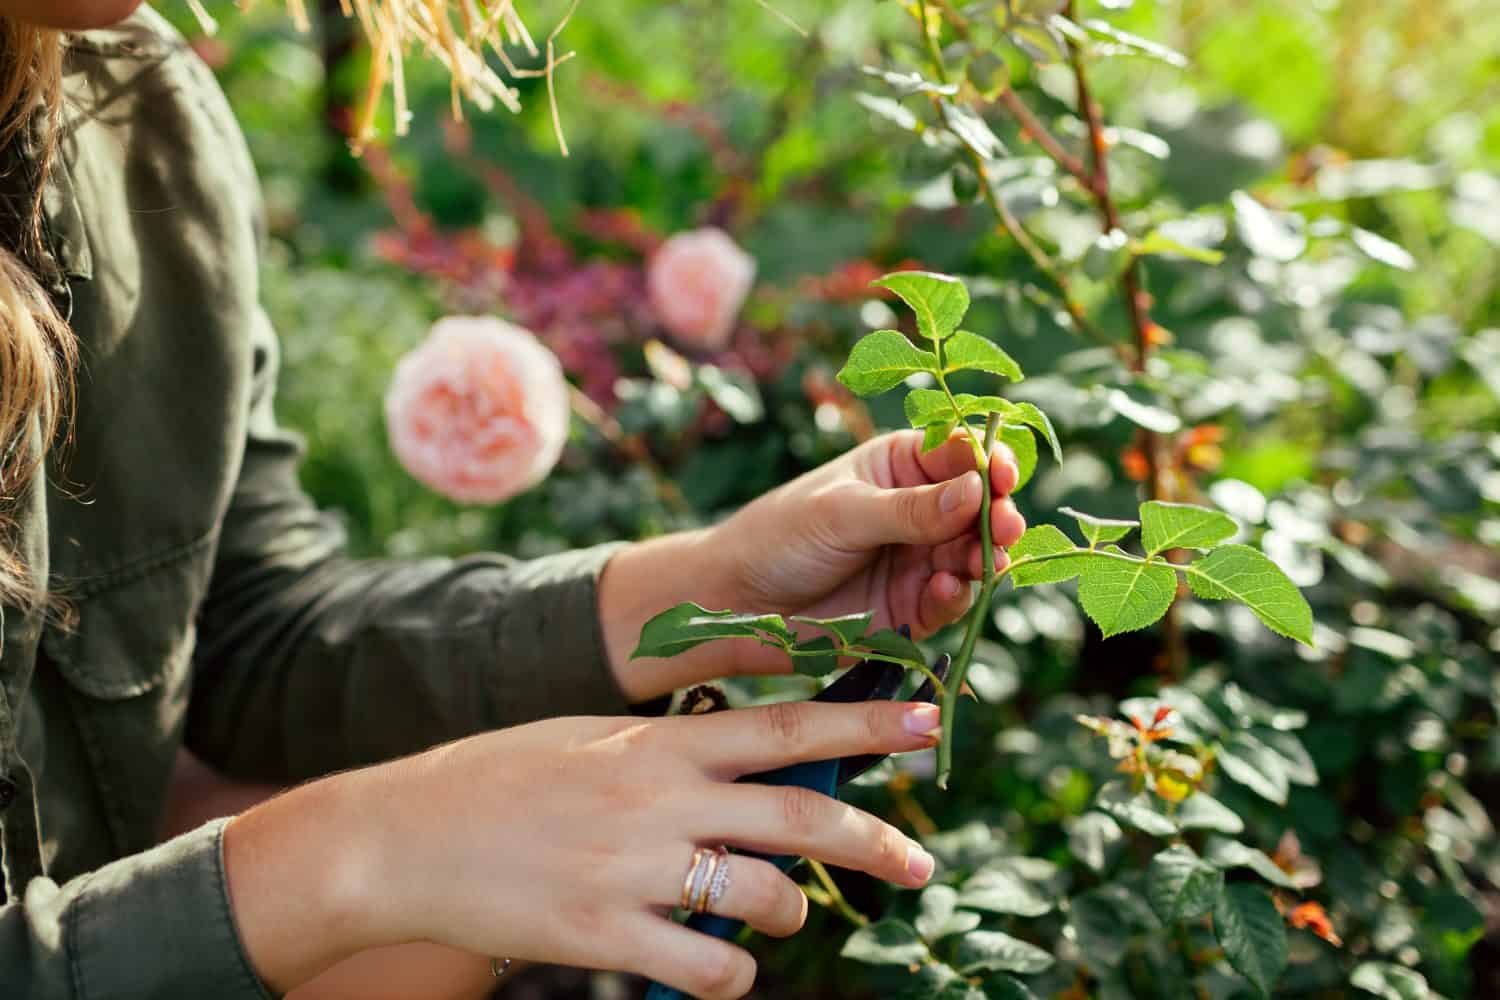 Propagation of roses. Gardener holding rose stem cutting in summer garden. Plant reproduction. Woman using pruner. Close up